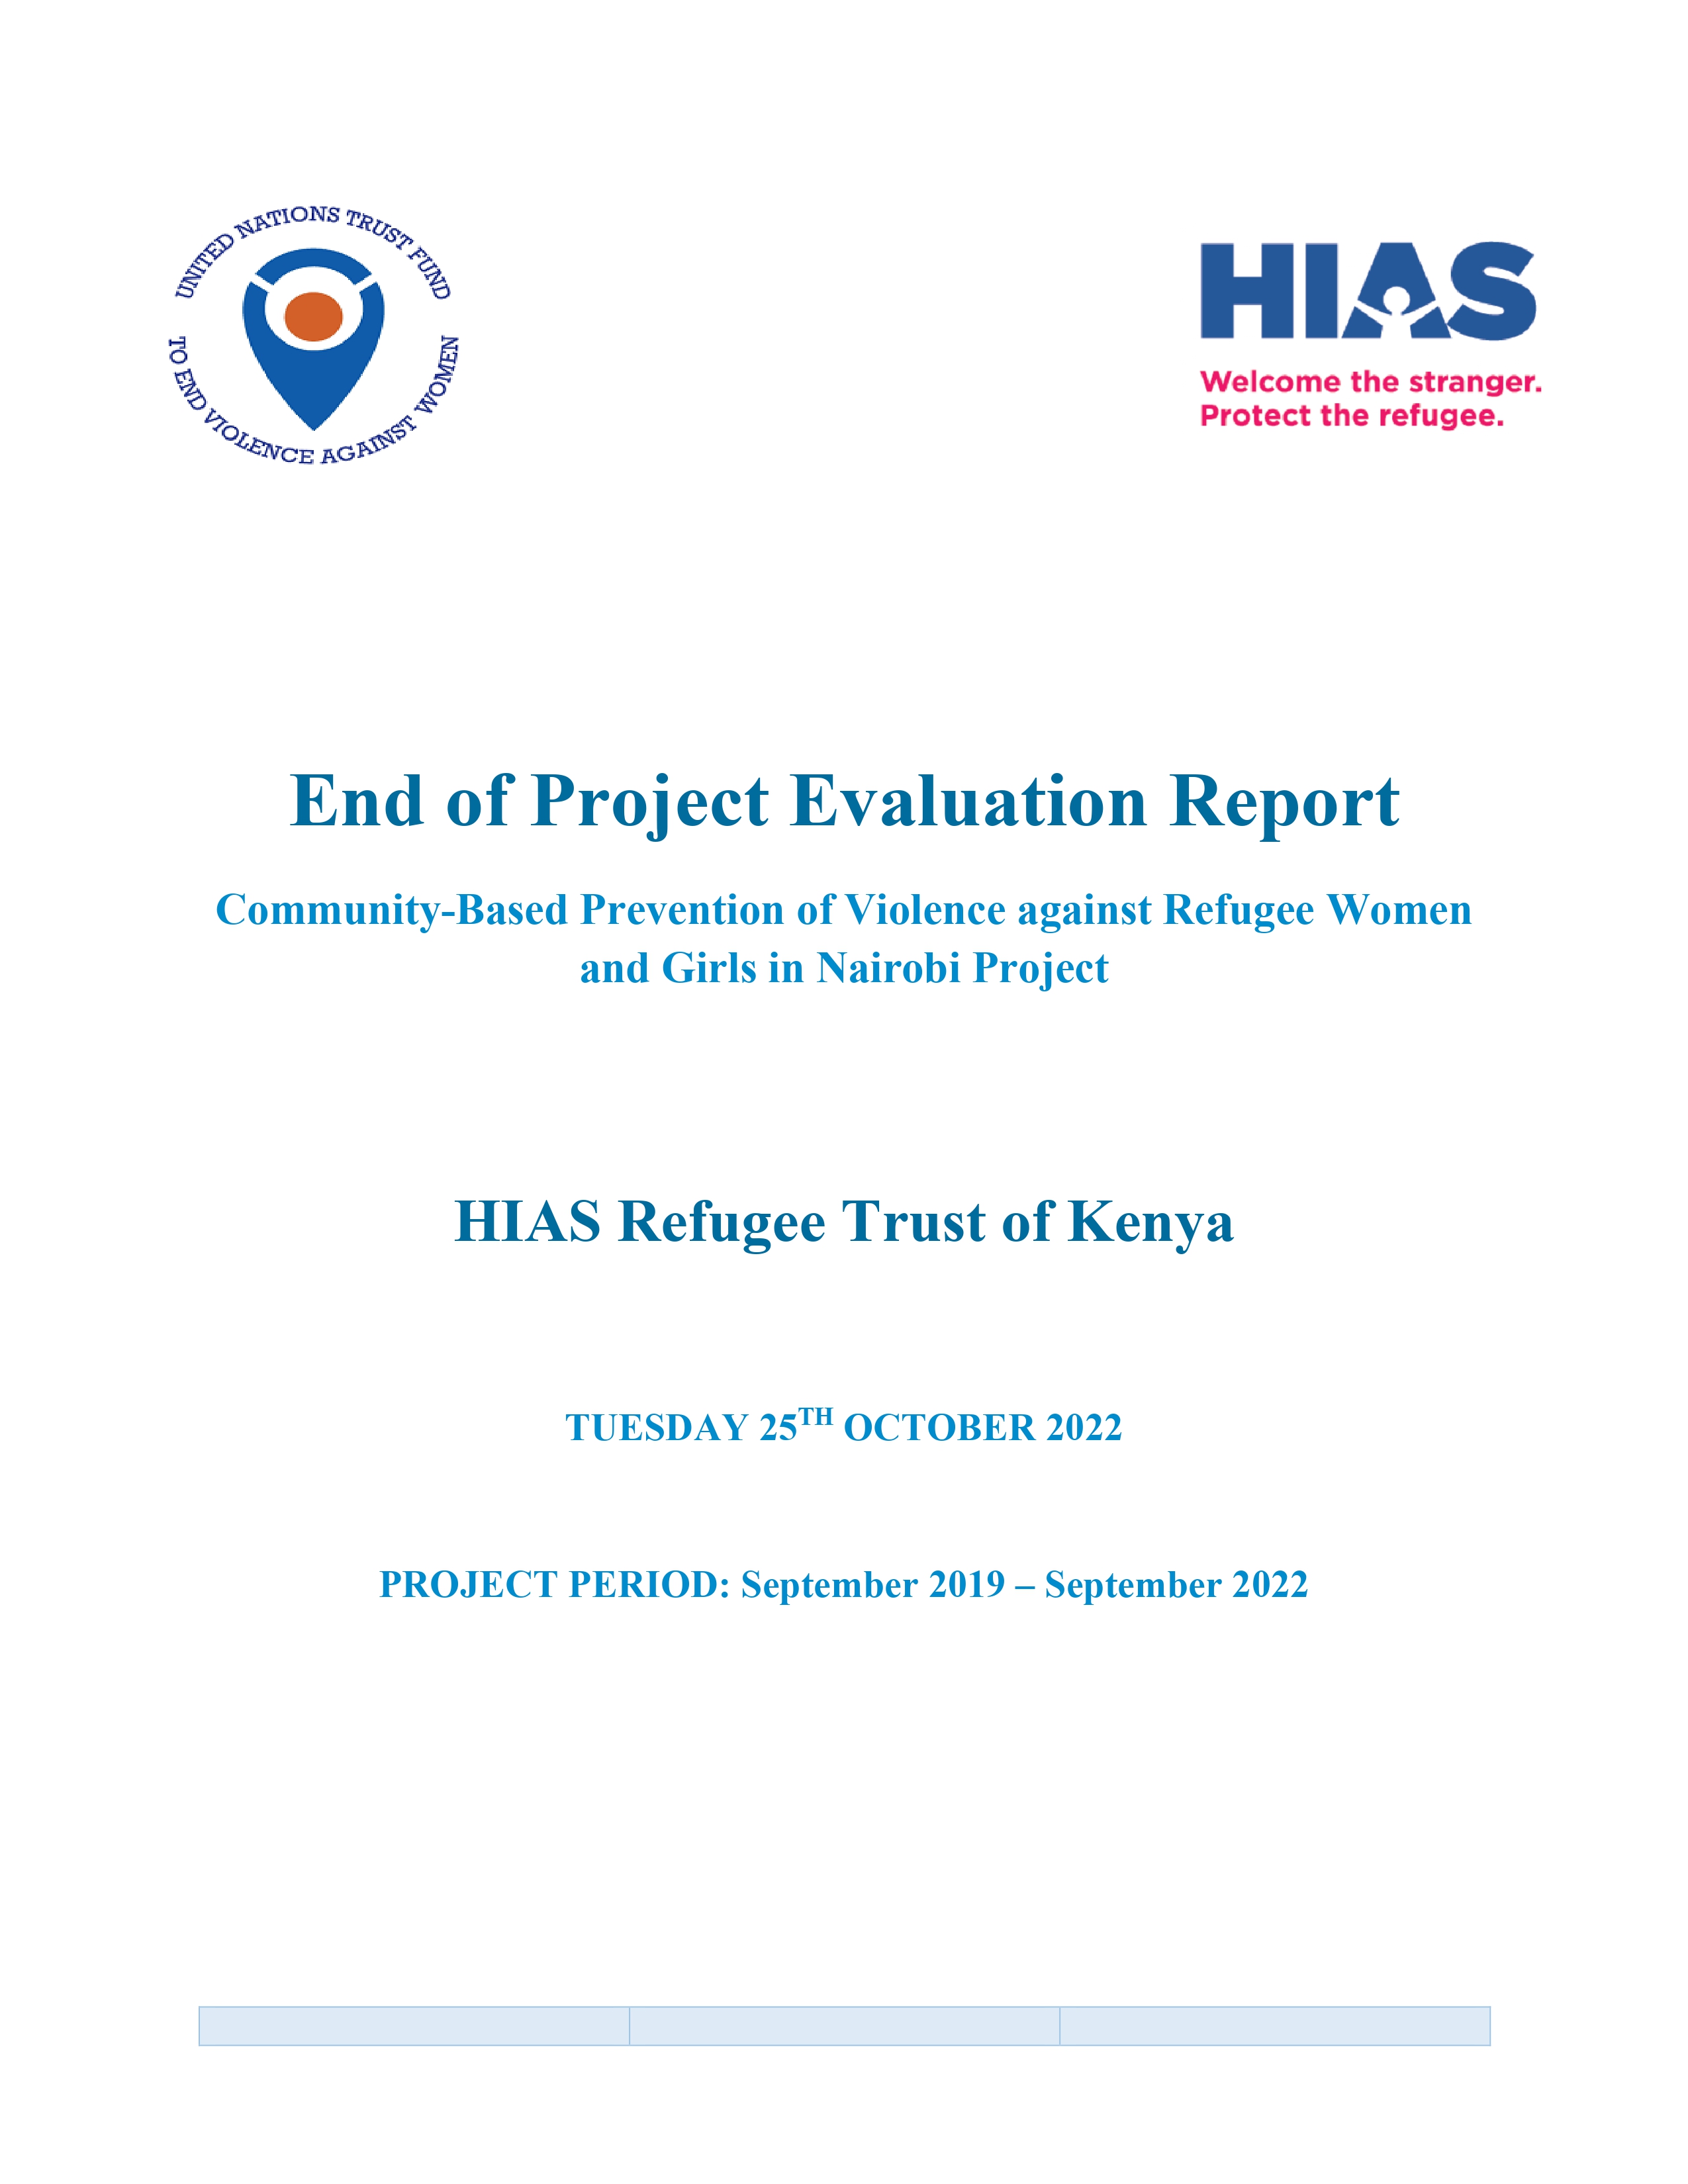 Final Evaluation: Community-Based Prevention of Violence against Refugee Women and Girls in Nairobi  